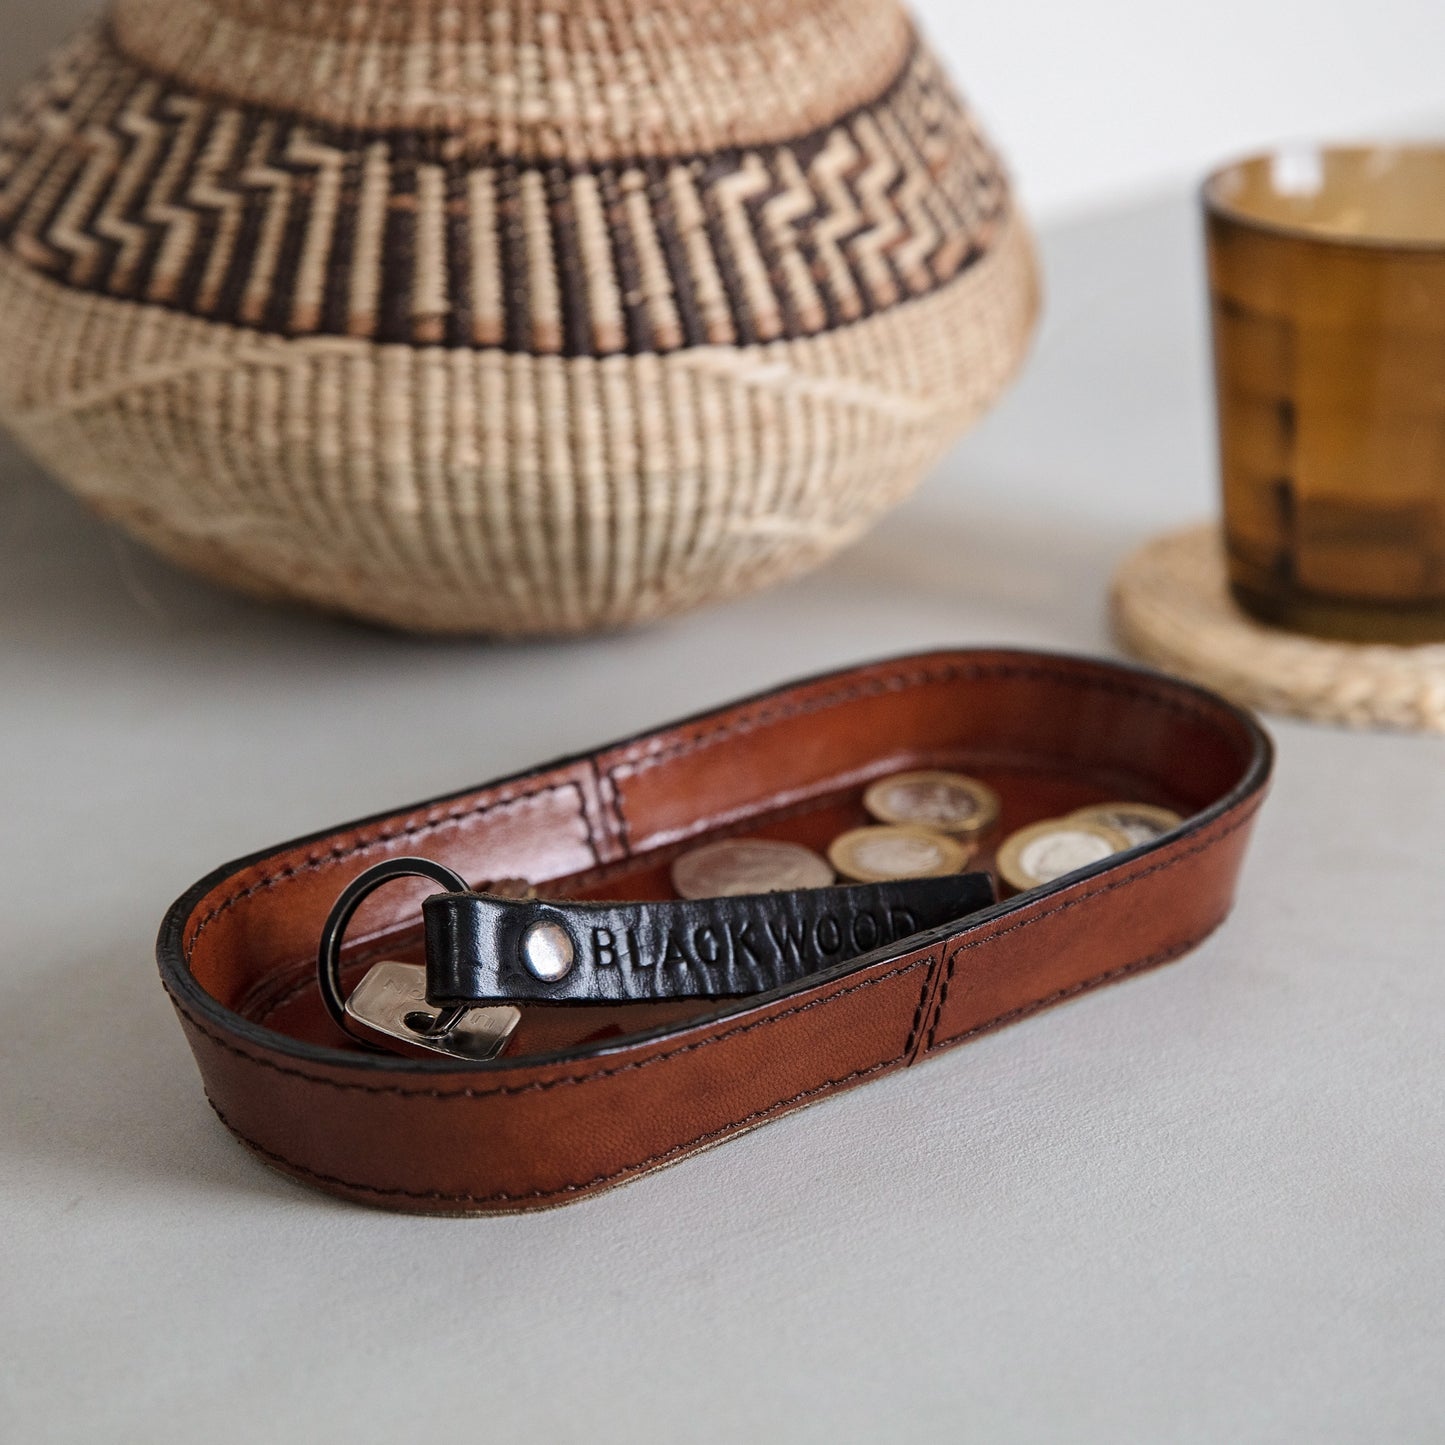 Leather tray for keys and loose change to use in the hallway or on the desk to keep spaces looking tidy. Handmade in tan leather and part of a collection of stylish desk and home accessories, that make thoughtful gifts for Father’s Day or a new home.